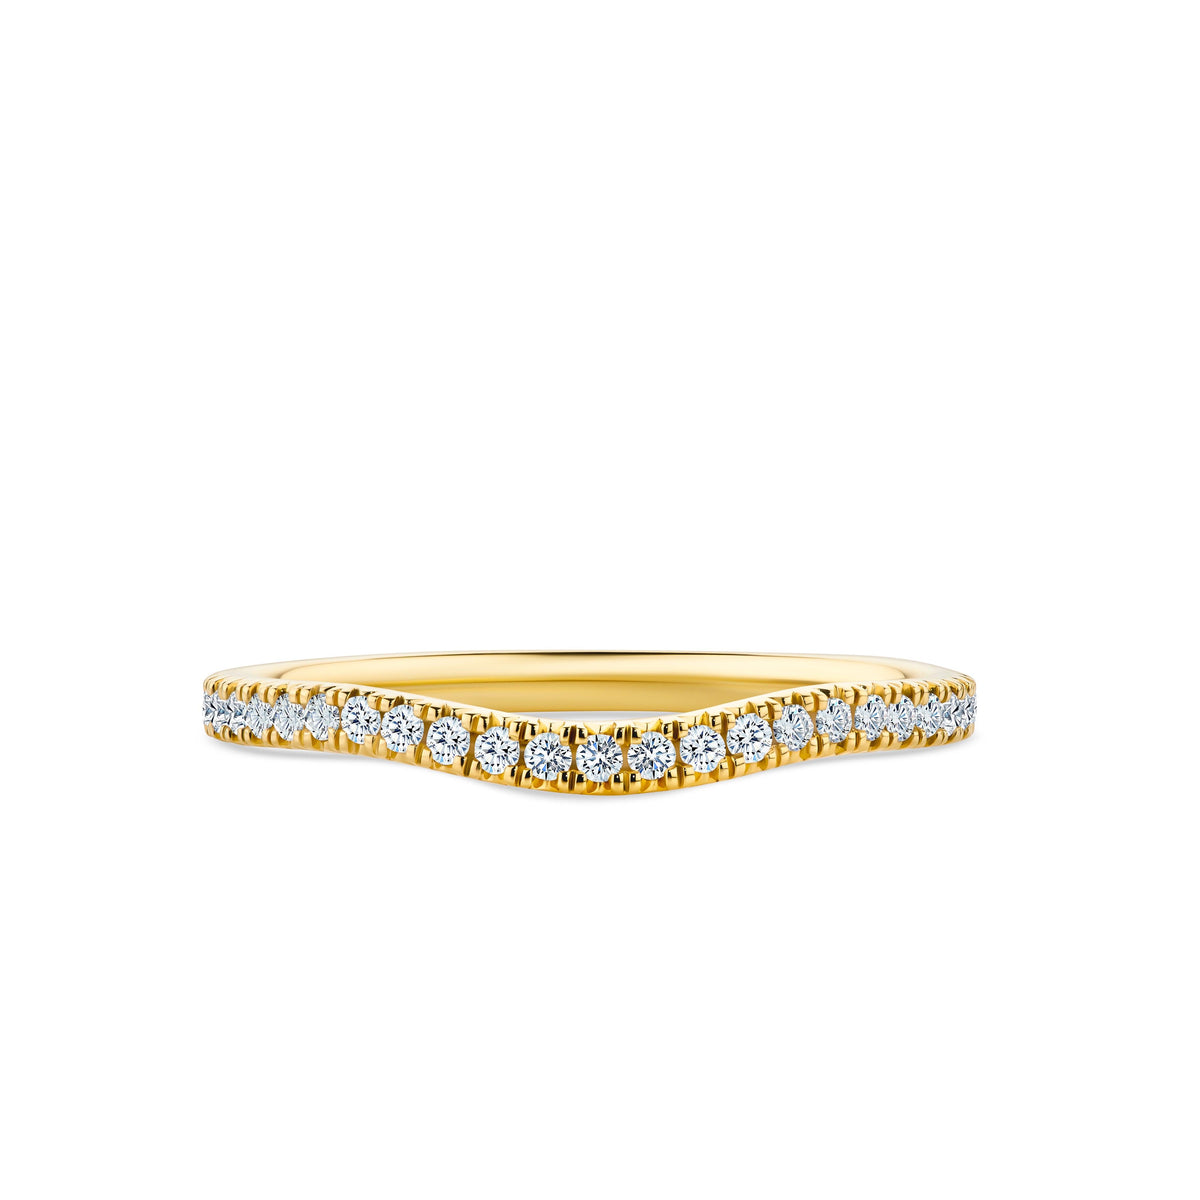 1917™ 0.21ct TW Diamond Wedding Band in 18ct Yellow Gold - Wallace Bishop